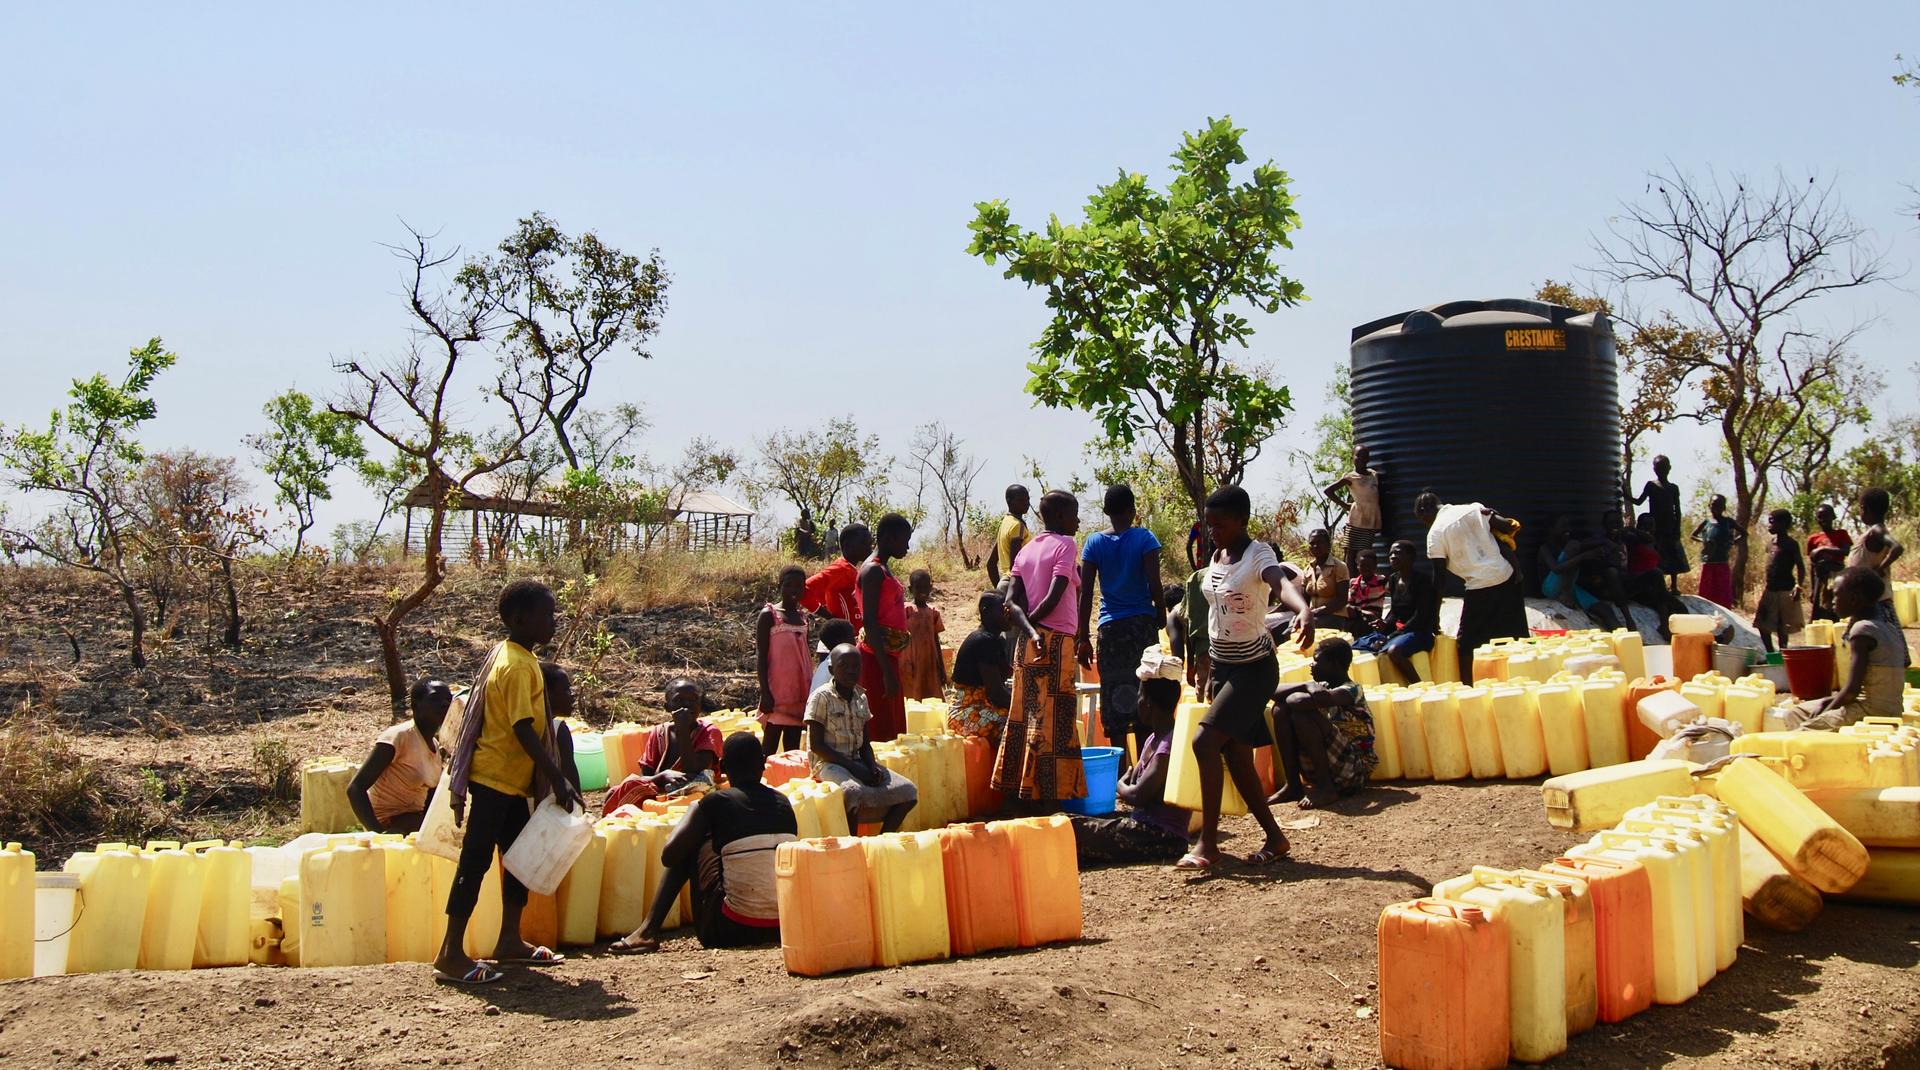 Refugees from South Sudan wait for water at the Bidi bidi refugee settlement in northern Uganda.